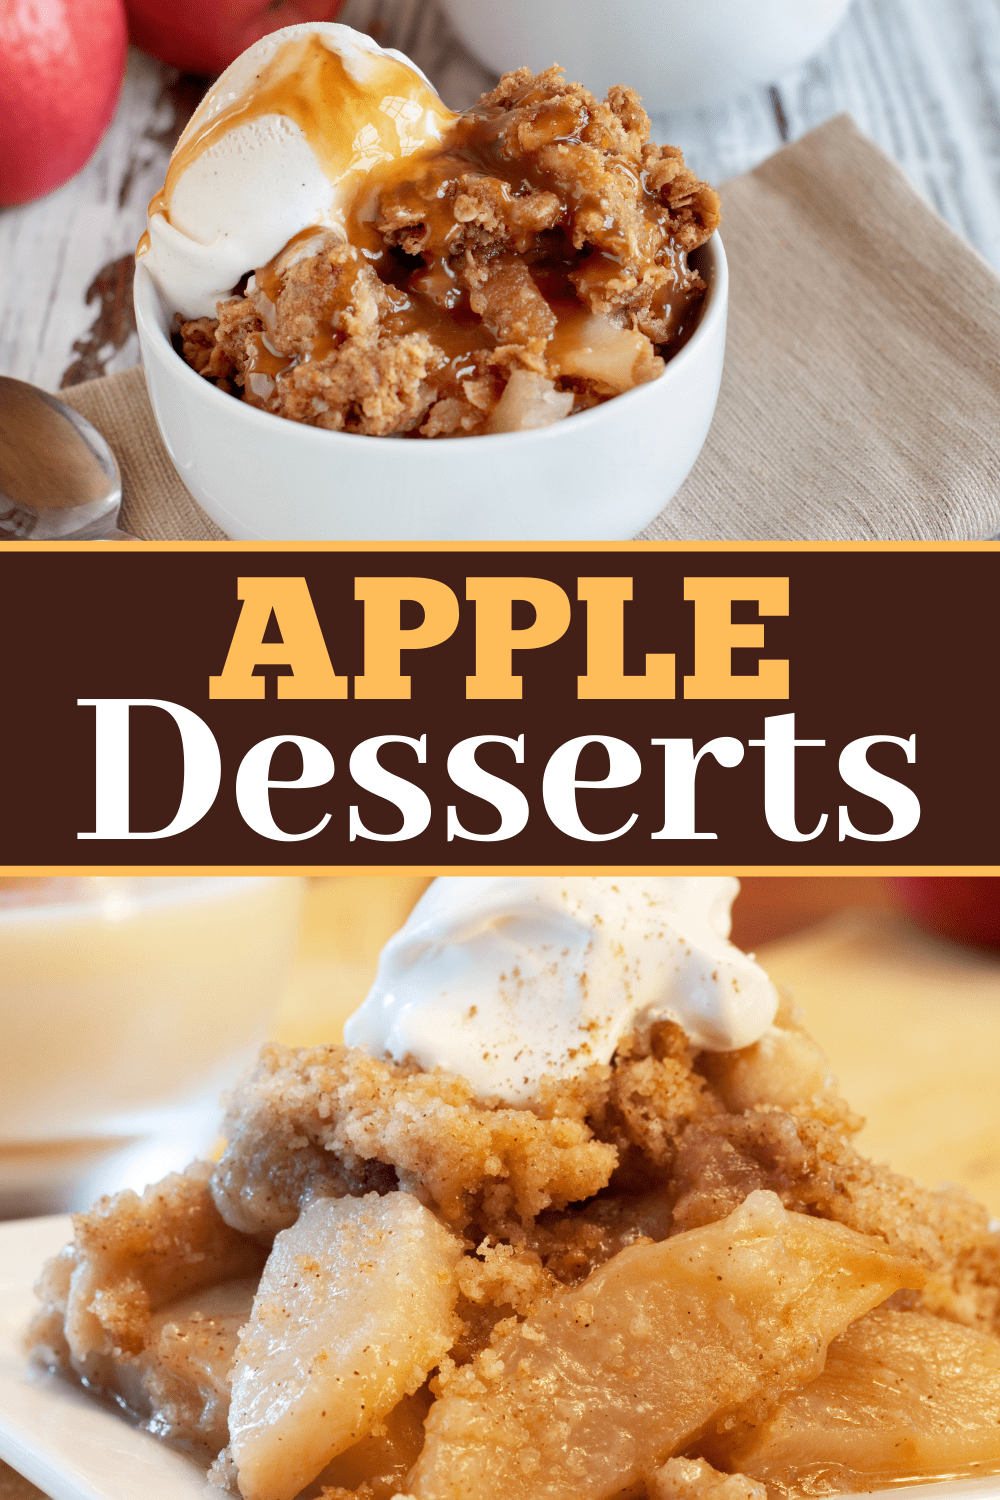 24 Apple Desserts (+ Easy Recipes) - Insanely Good